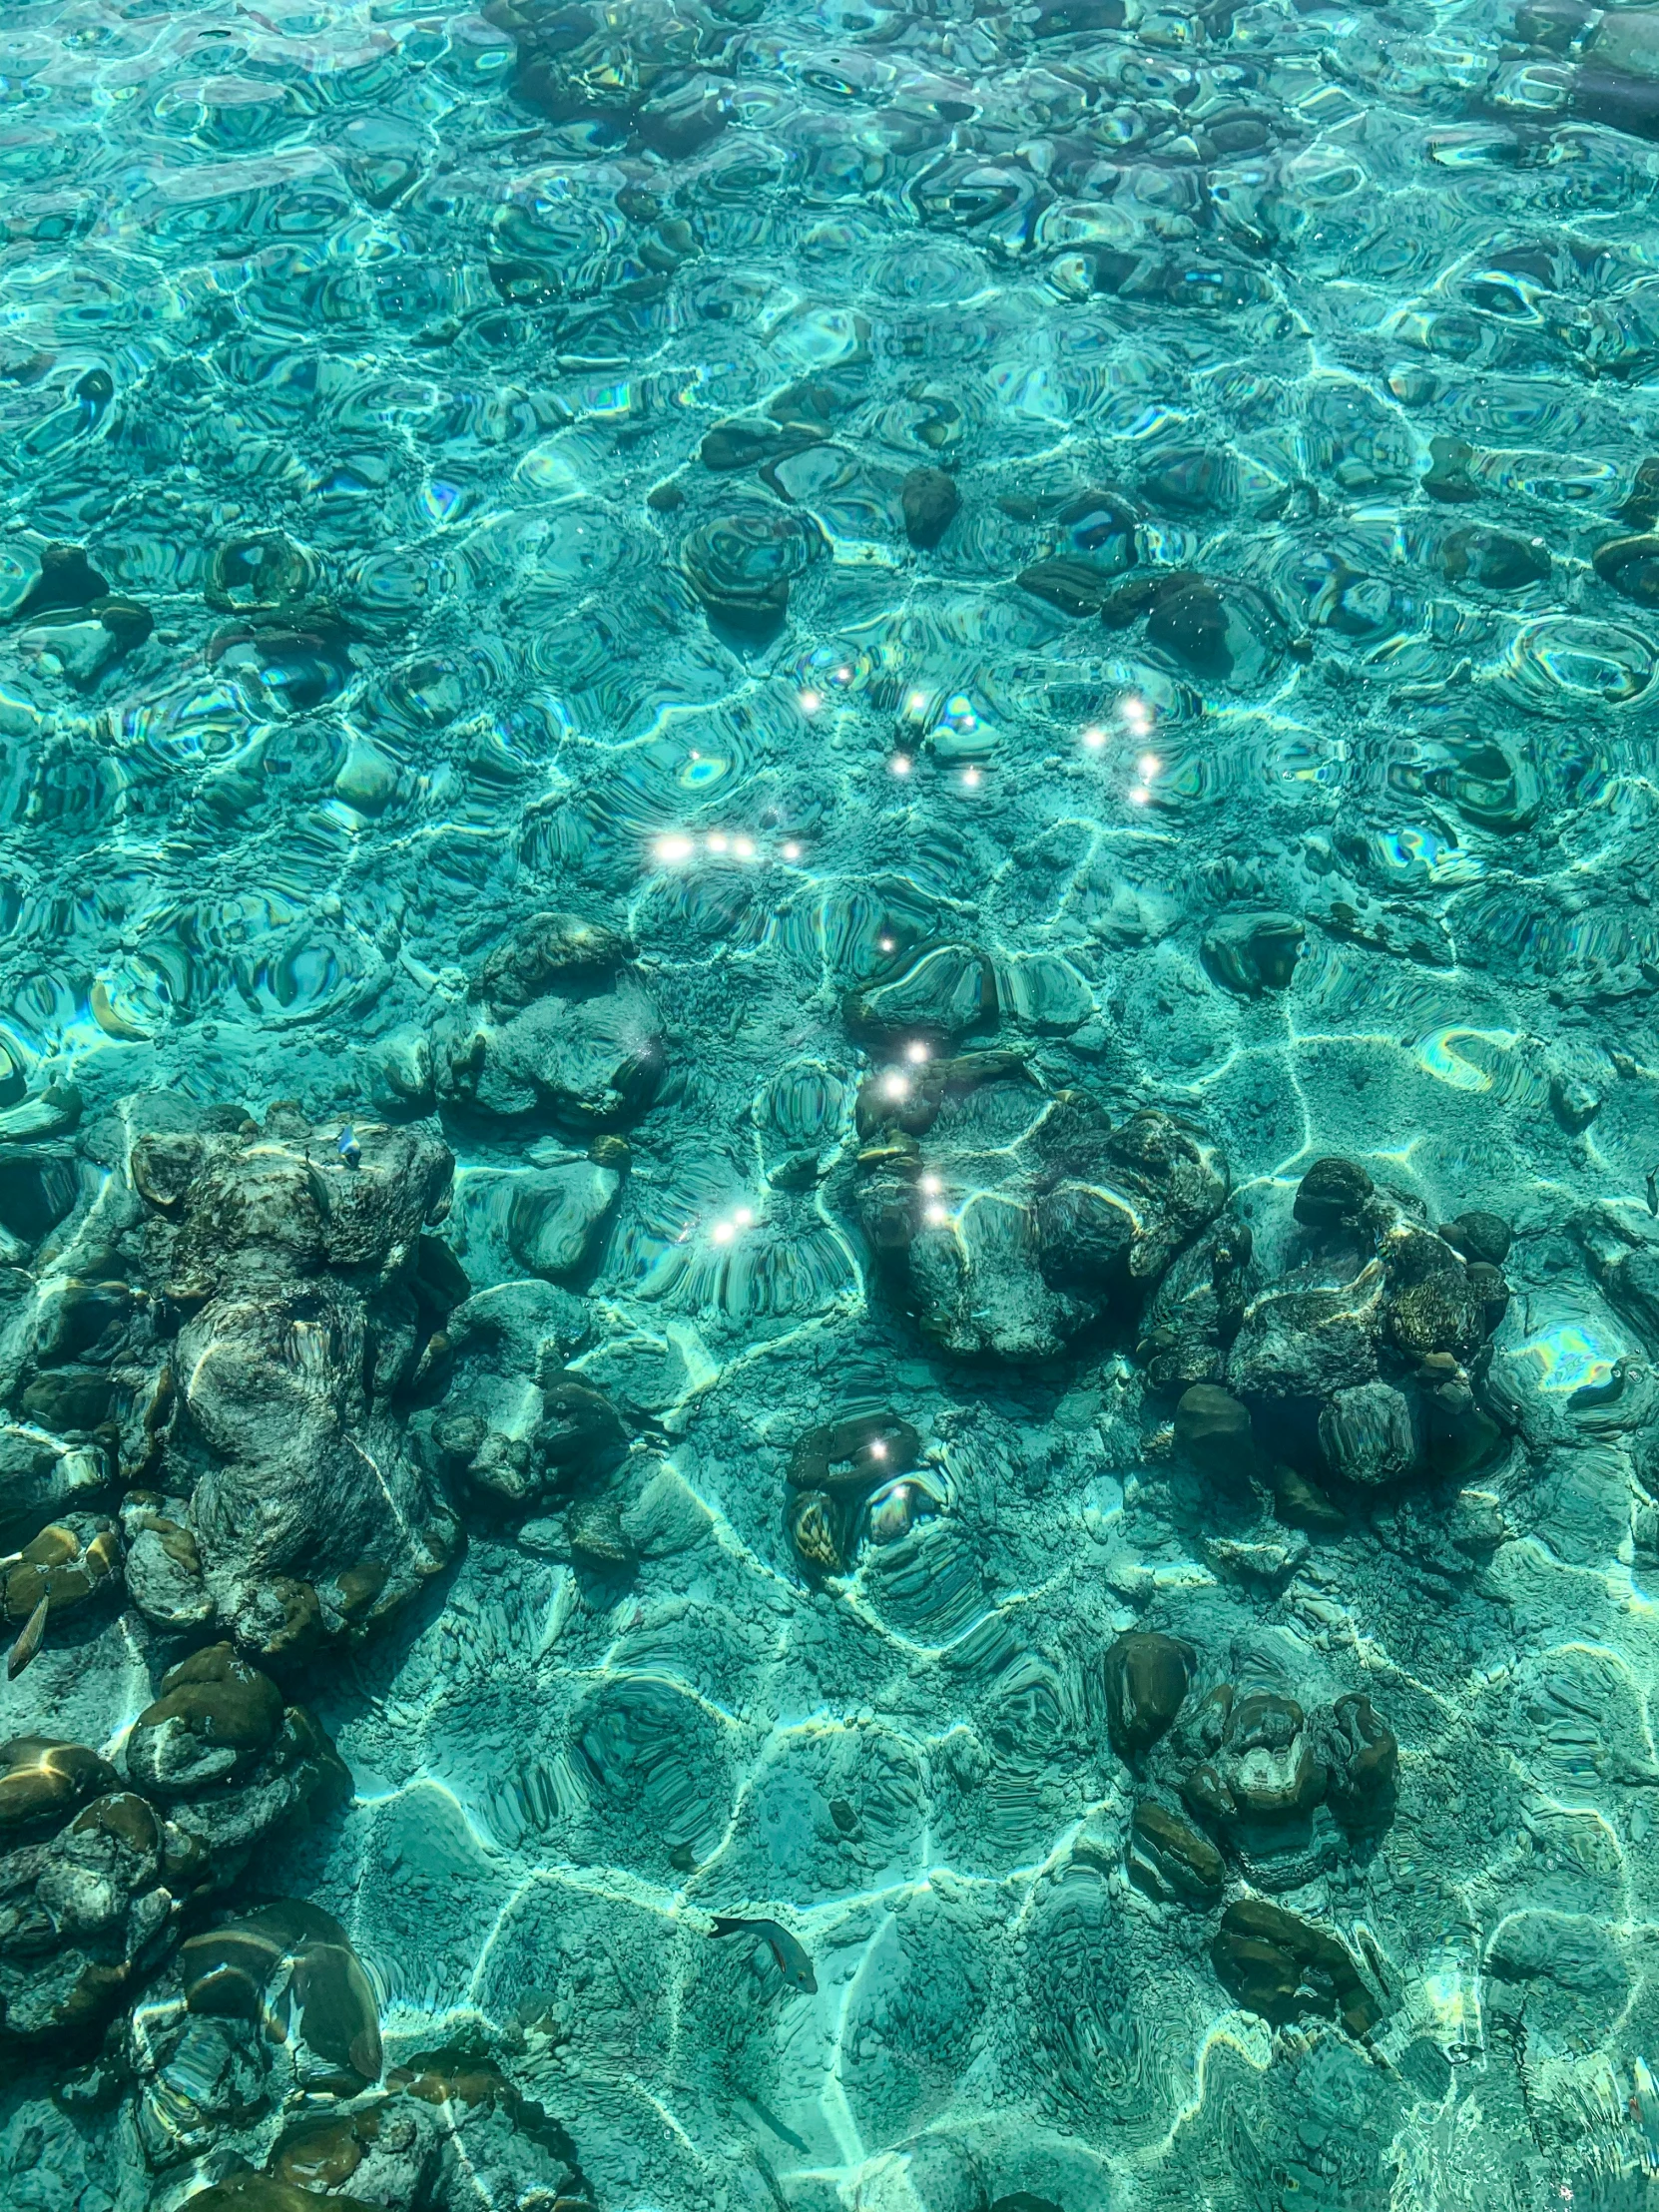 clear, green water with rocks in it